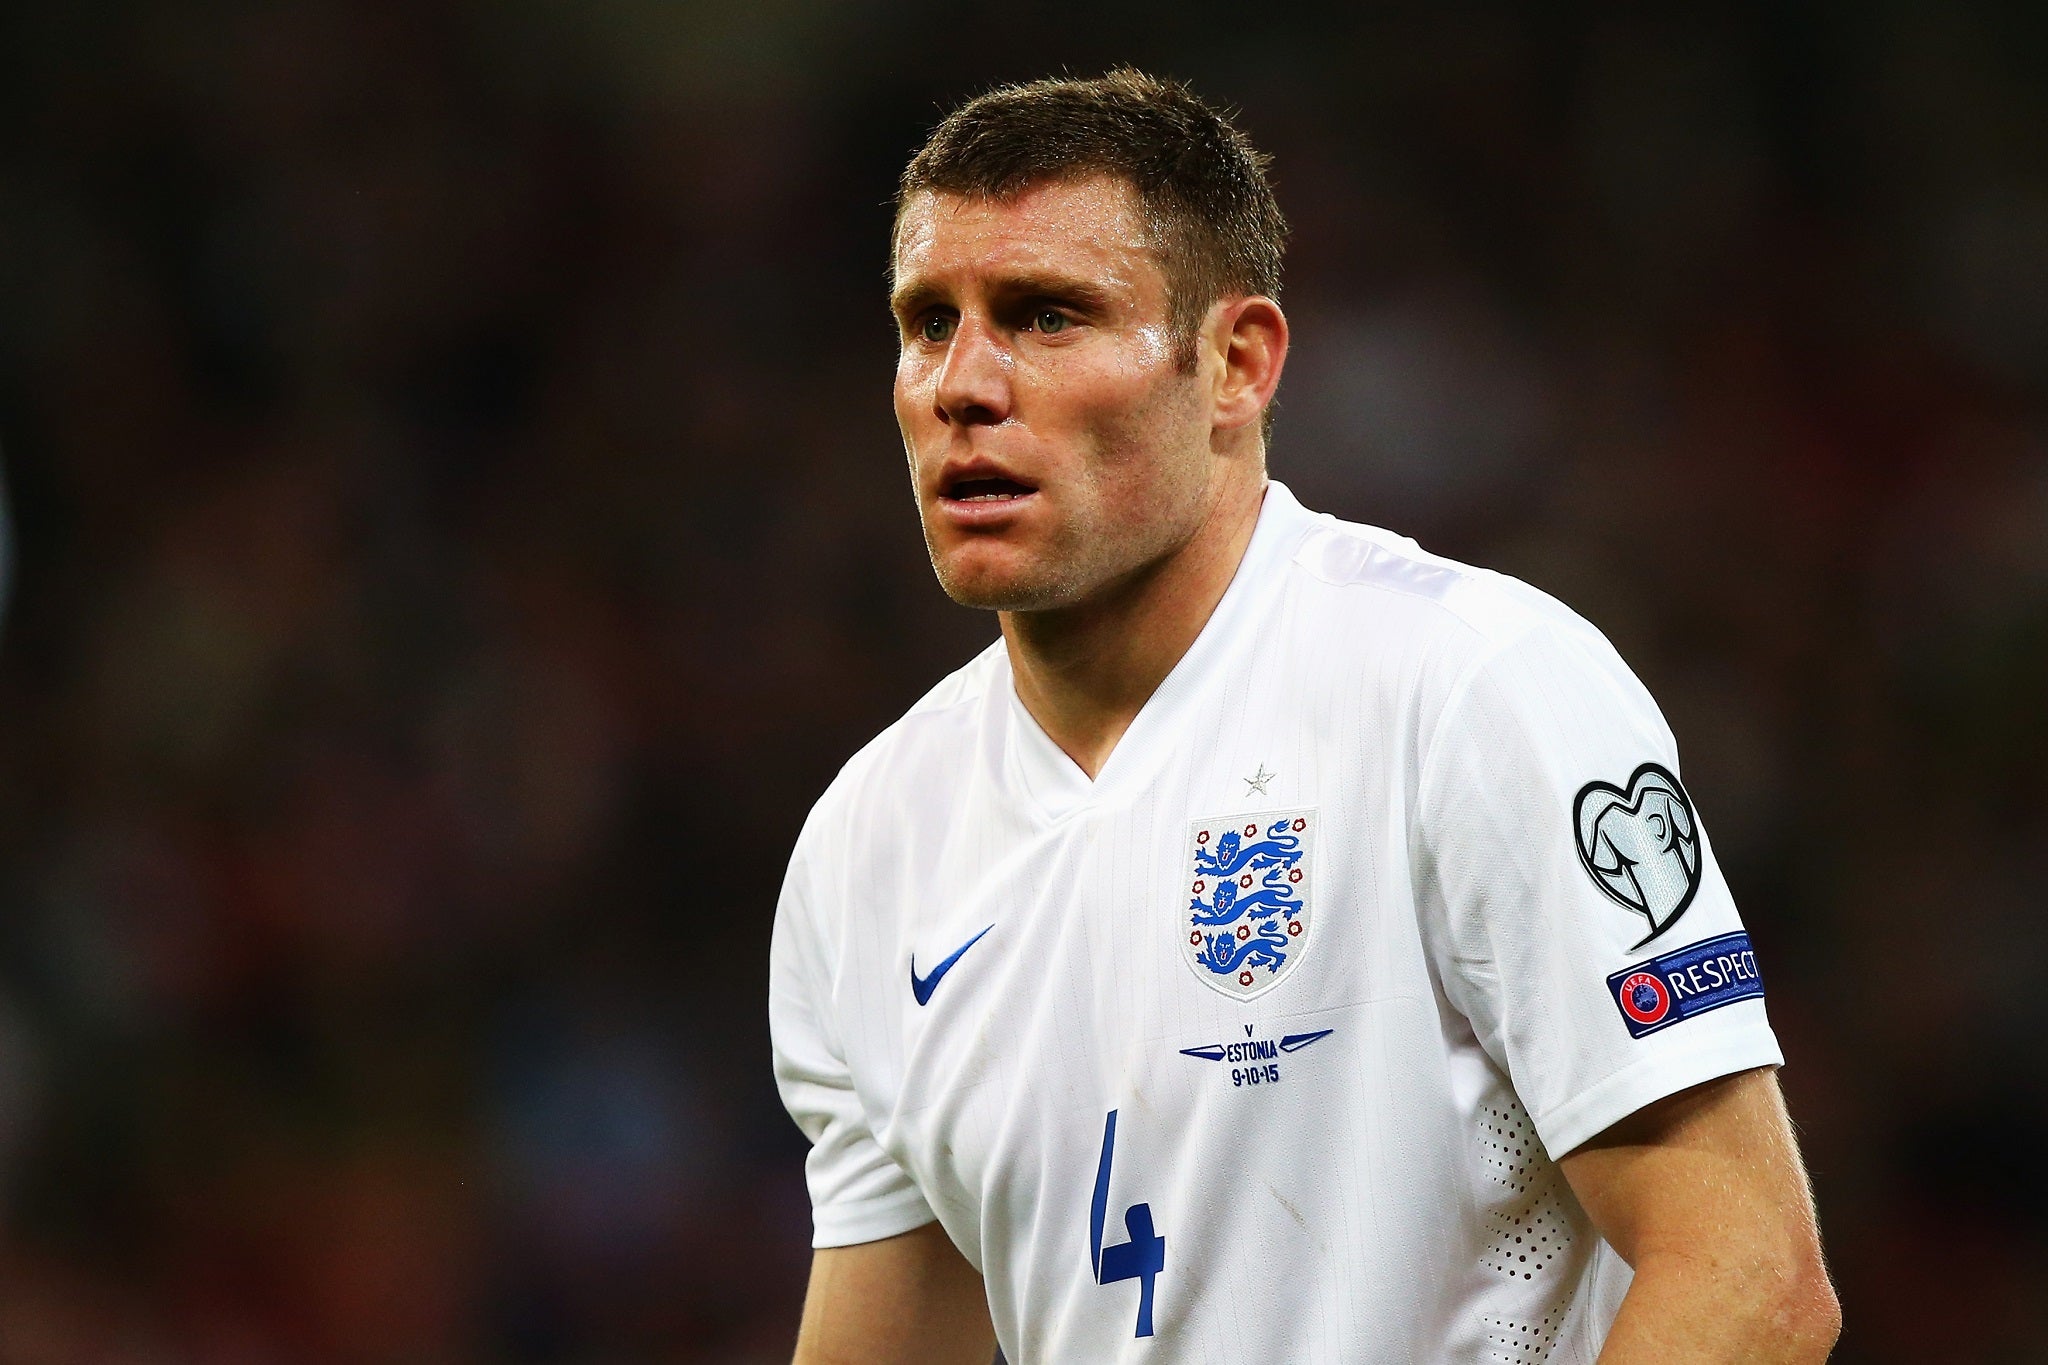 James Milner will captain the team